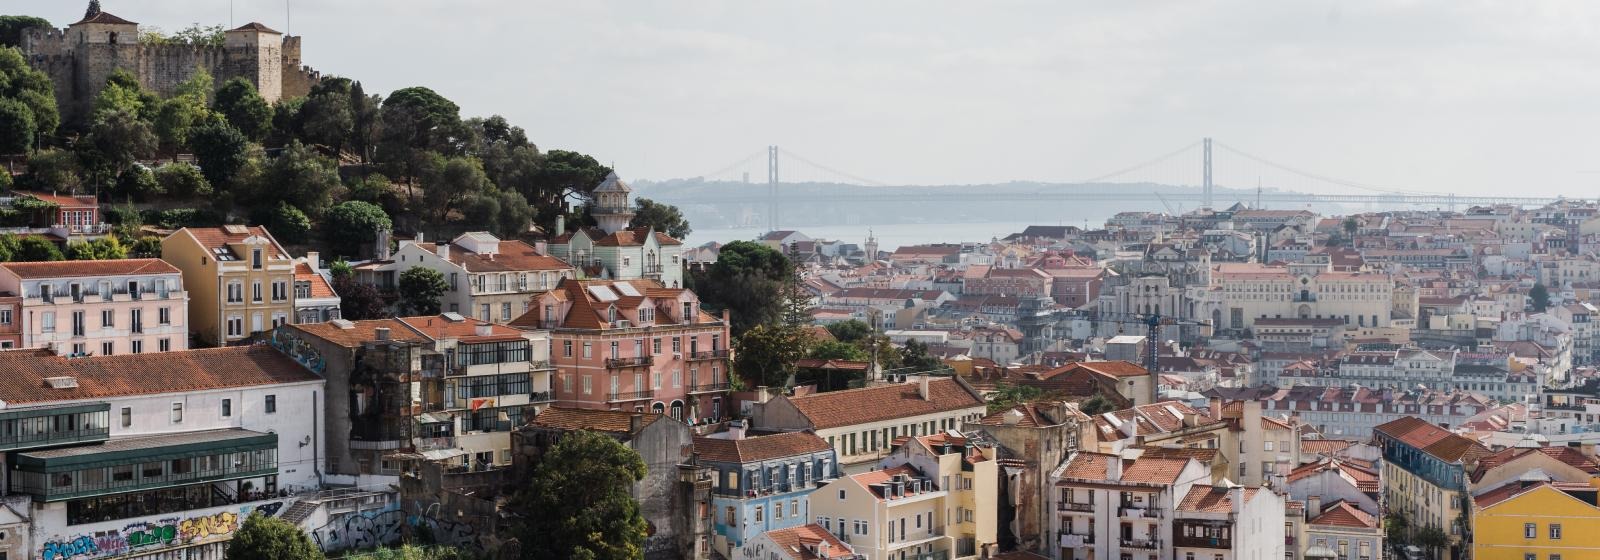 What is the main square in Lisbon's city center?